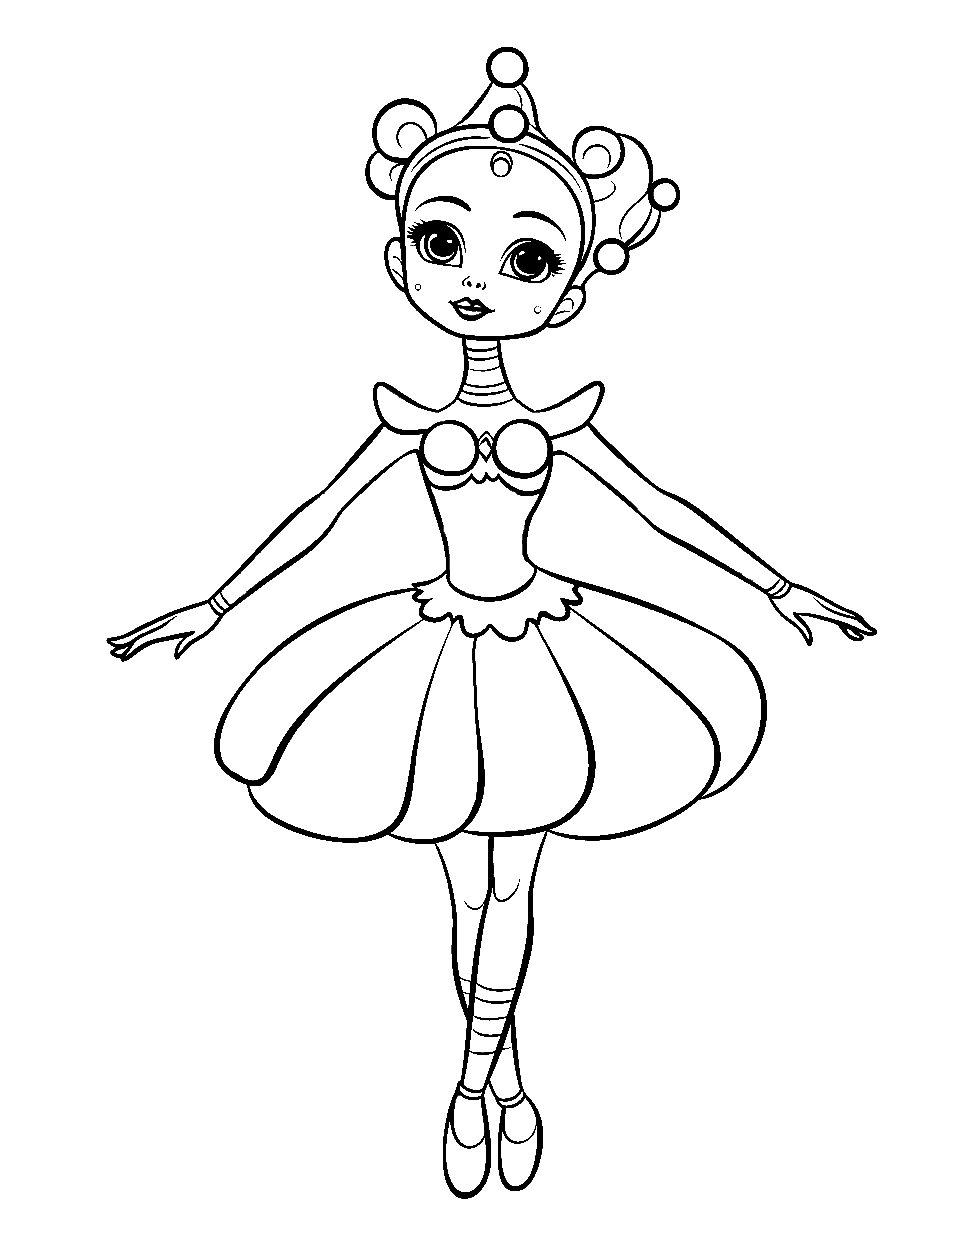 Ballora’s Human Dance Five Nights at Freddys Coloring Page - Ballora with a human-looking skin gracefully dancing.